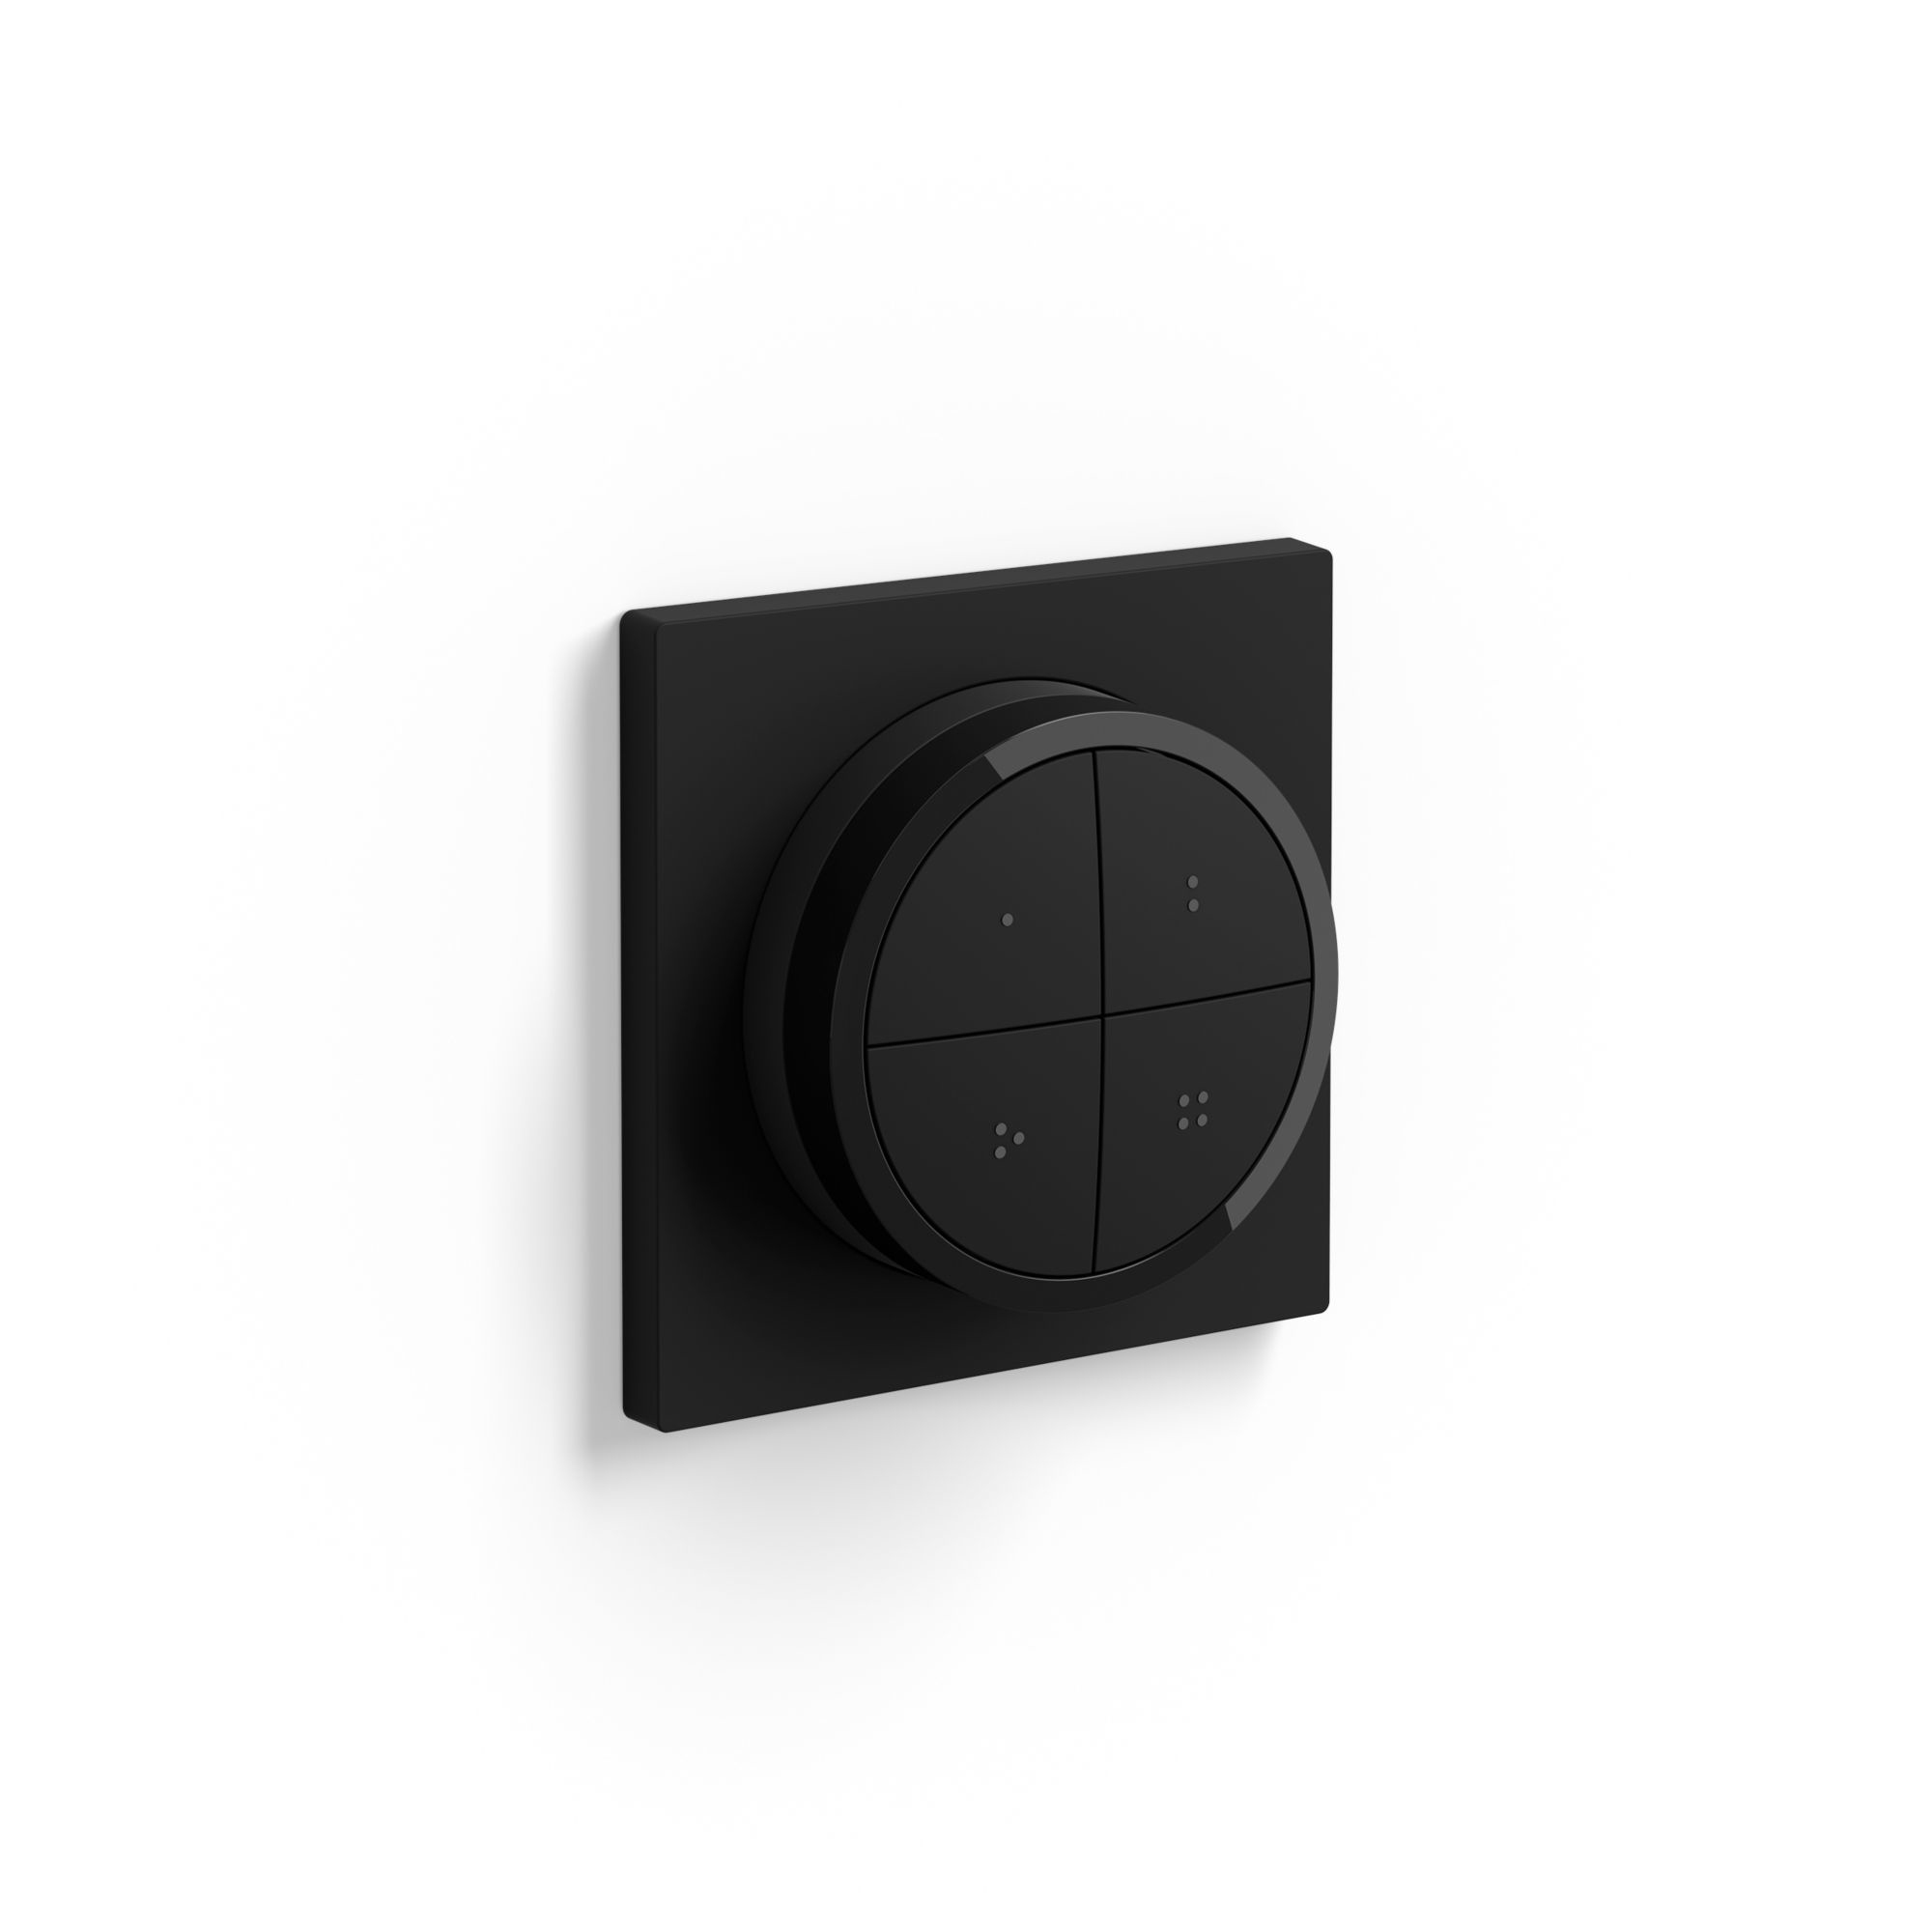 Philips by Signify Tap dial switch